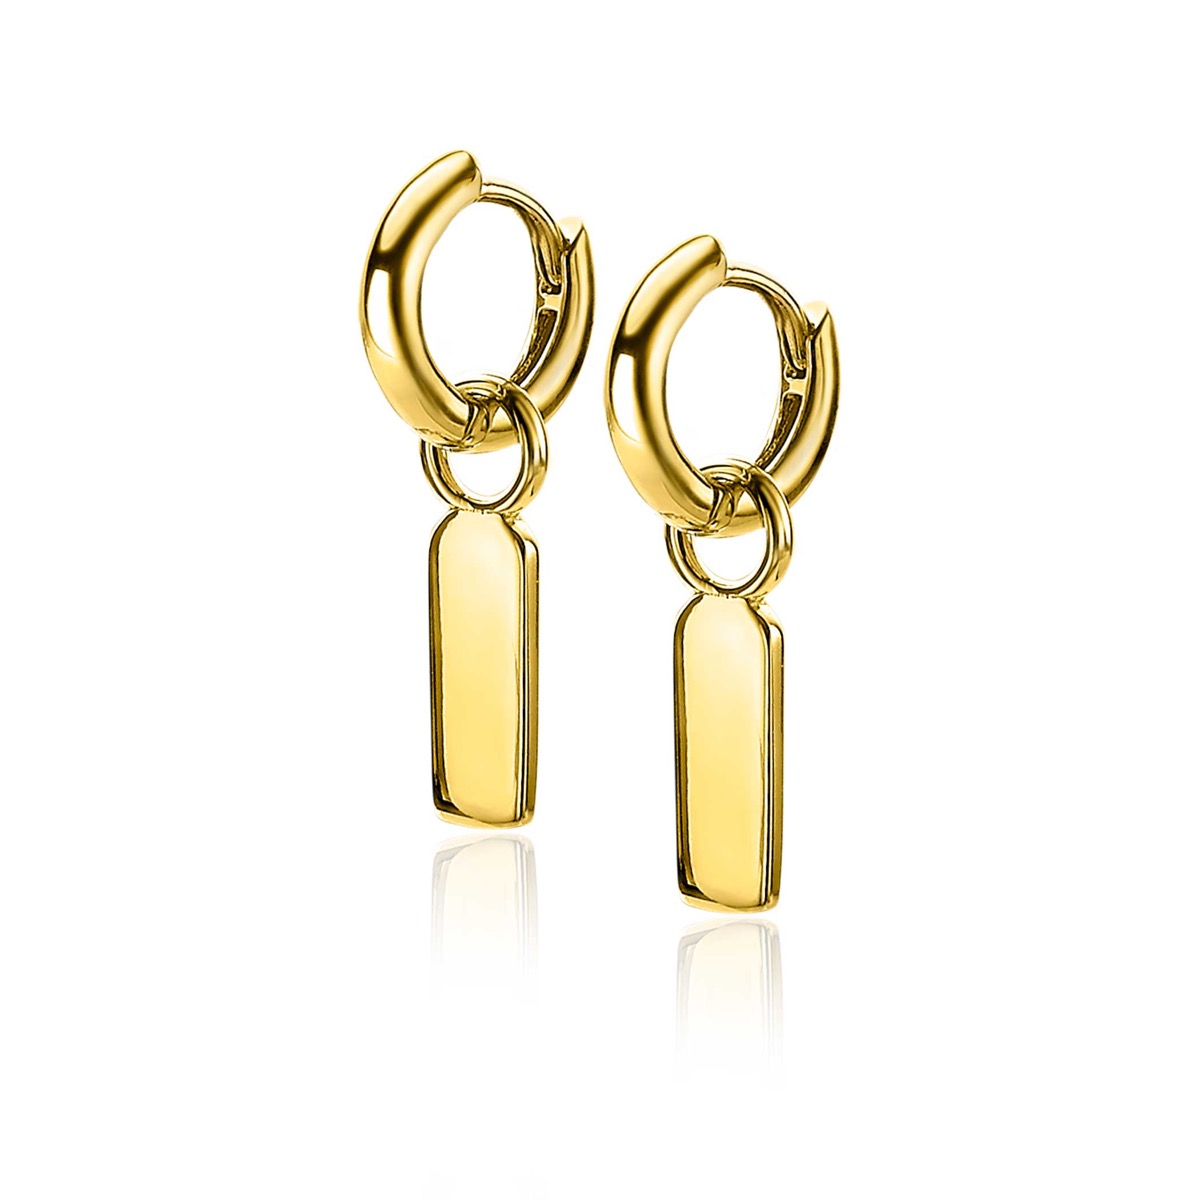 13mm ZINZI Gold Plated Sterling Silver Earrings Pendants Rectangular Small Plate ZICH2344G (excl. hoop earrings)